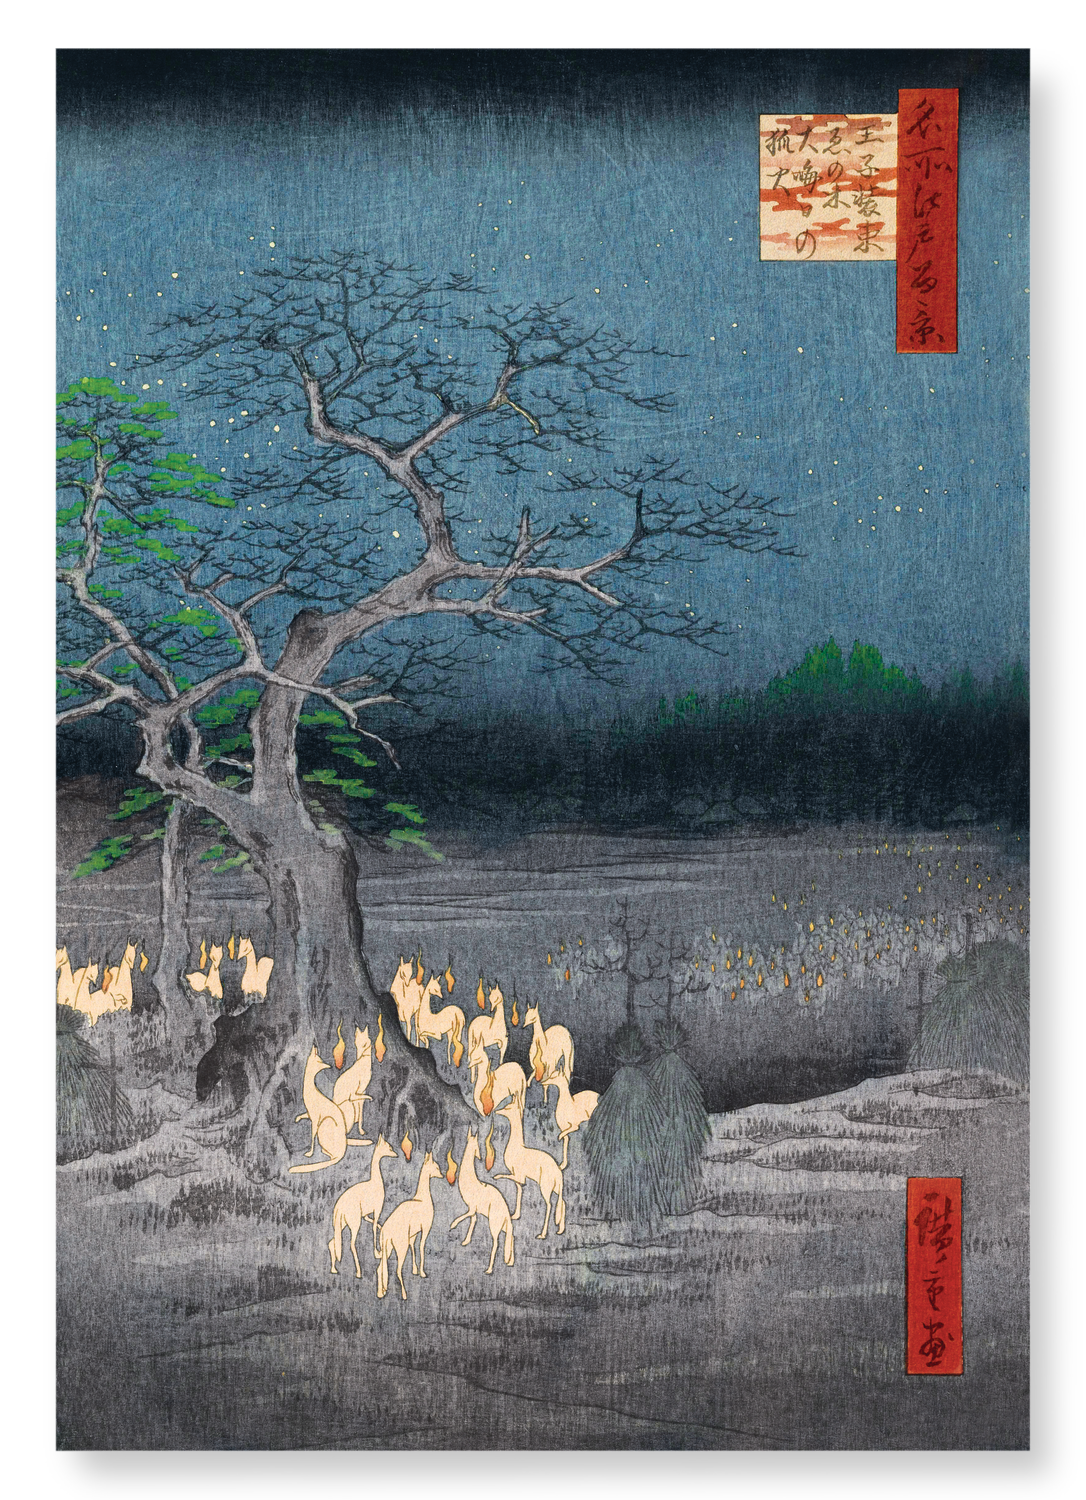 NEW YEAR'S EVE FOXFIRES AT THE CHANGING TREE, OJI (1857)